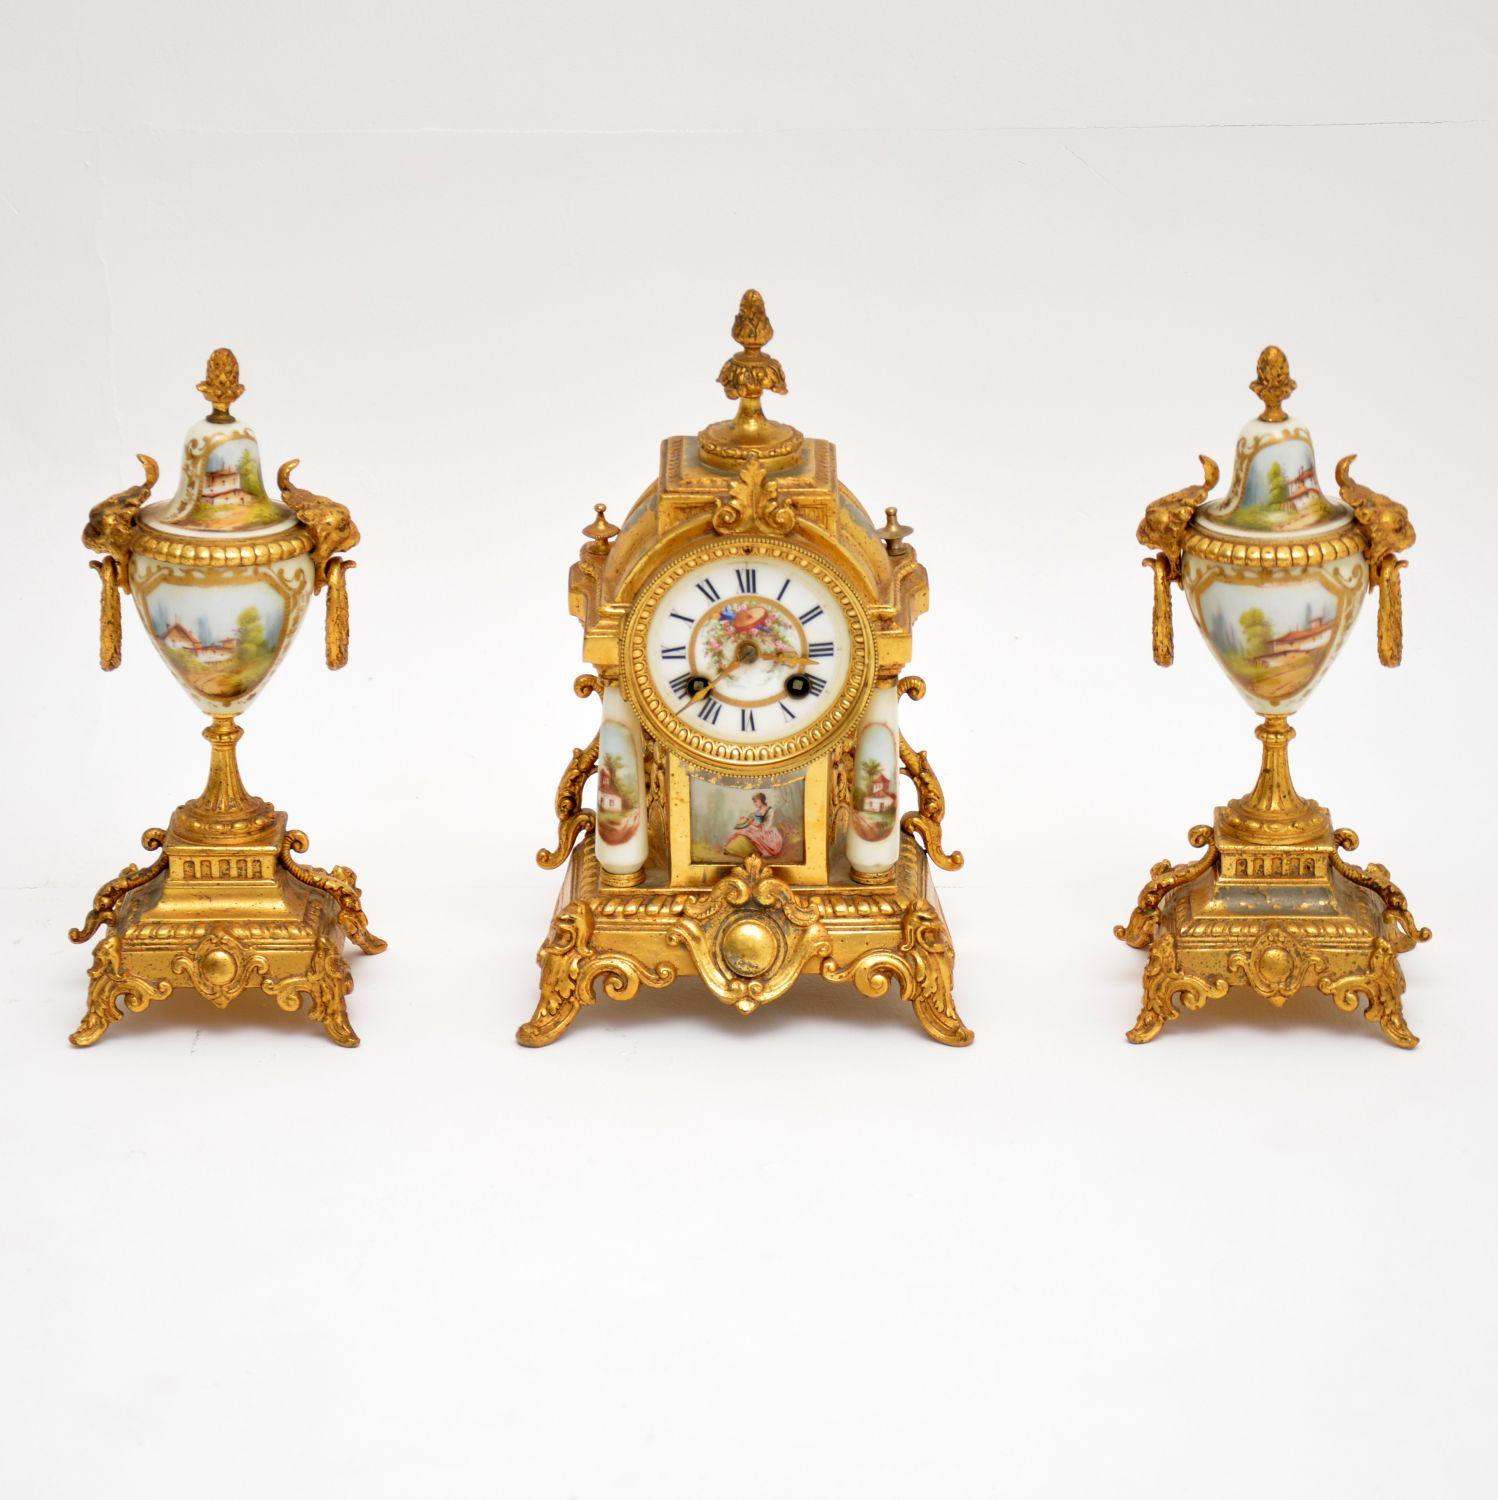 Very pretty antique French clock set, consisting of the clock & two garnitures, all dating from around the 1890-1910 period. This whole set is in good original condition & the gilding is a bit rubbed in places, which adds to the character. The